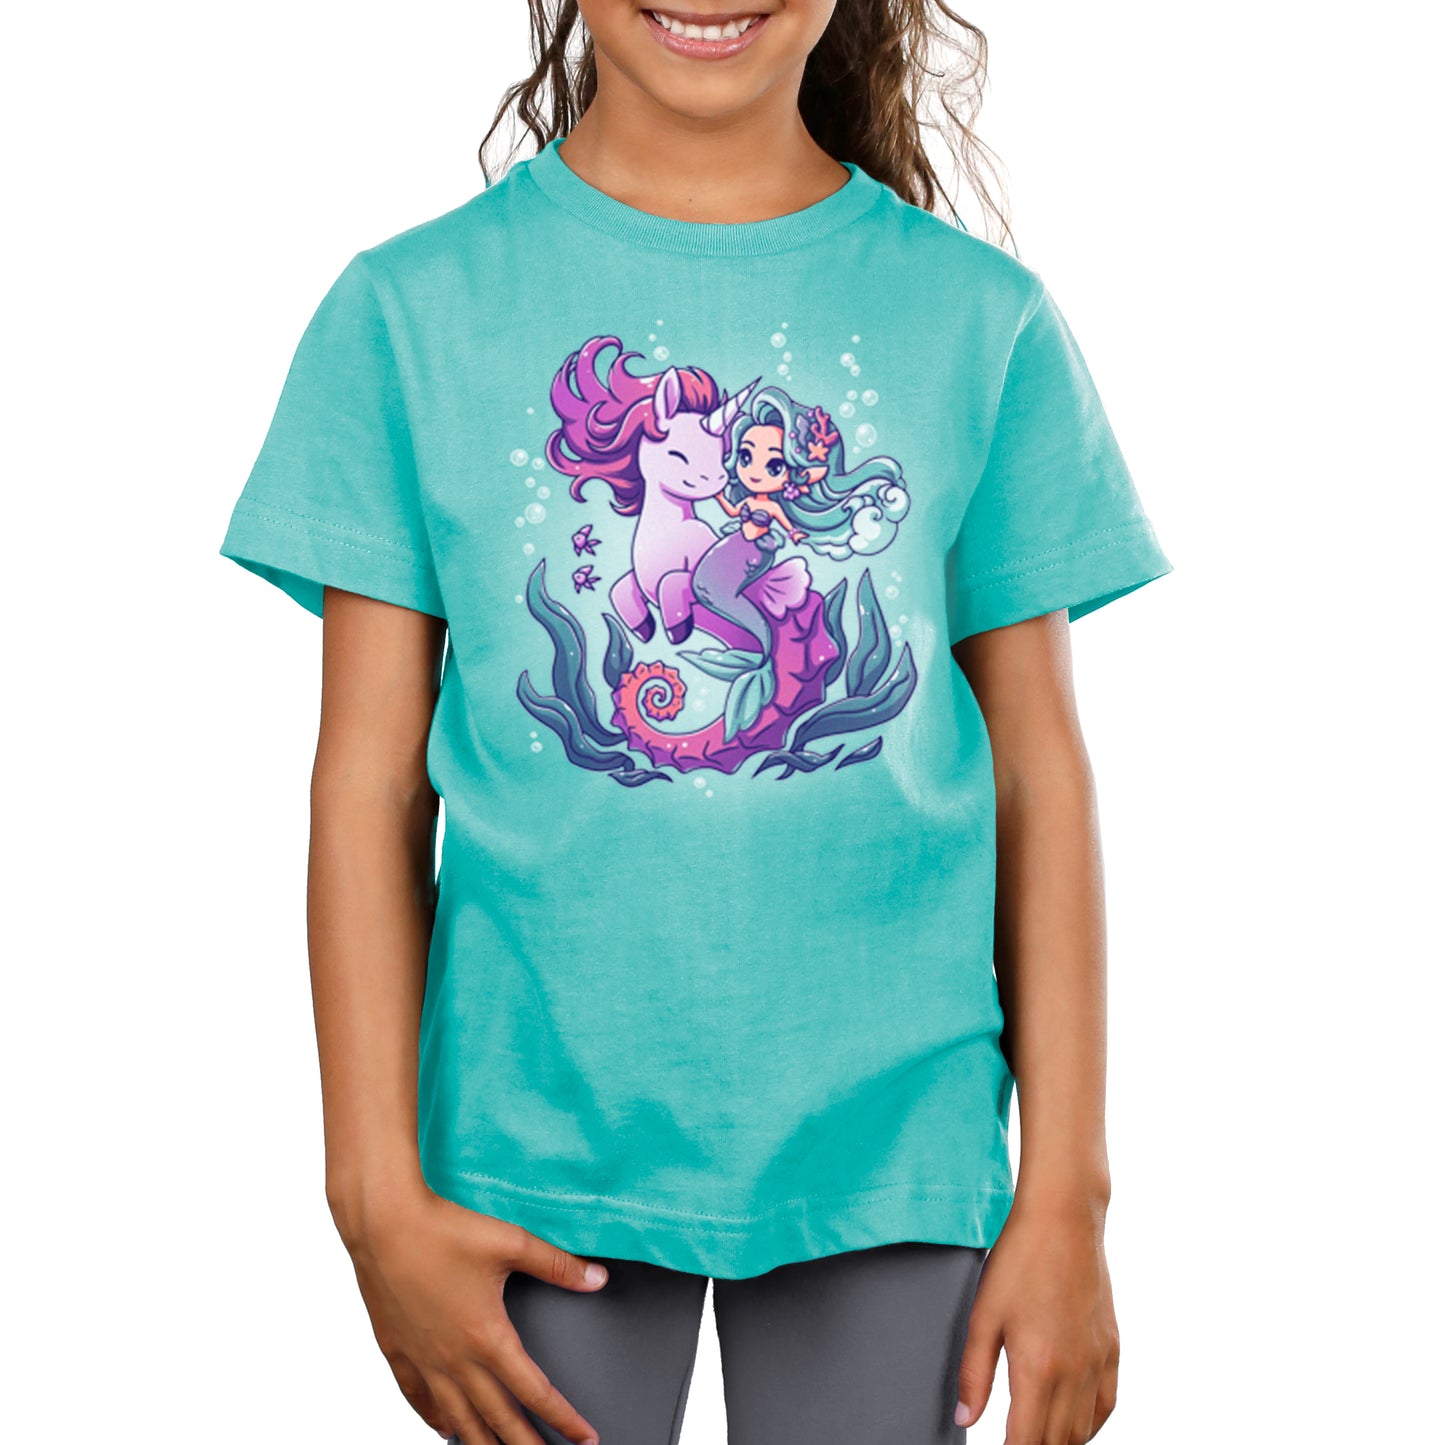 A girl wearing a turquoise TeeTurtle t-shirt with the BFFs (Sea Unicorn and Mermaid) on it, ready for an undersea adventure.